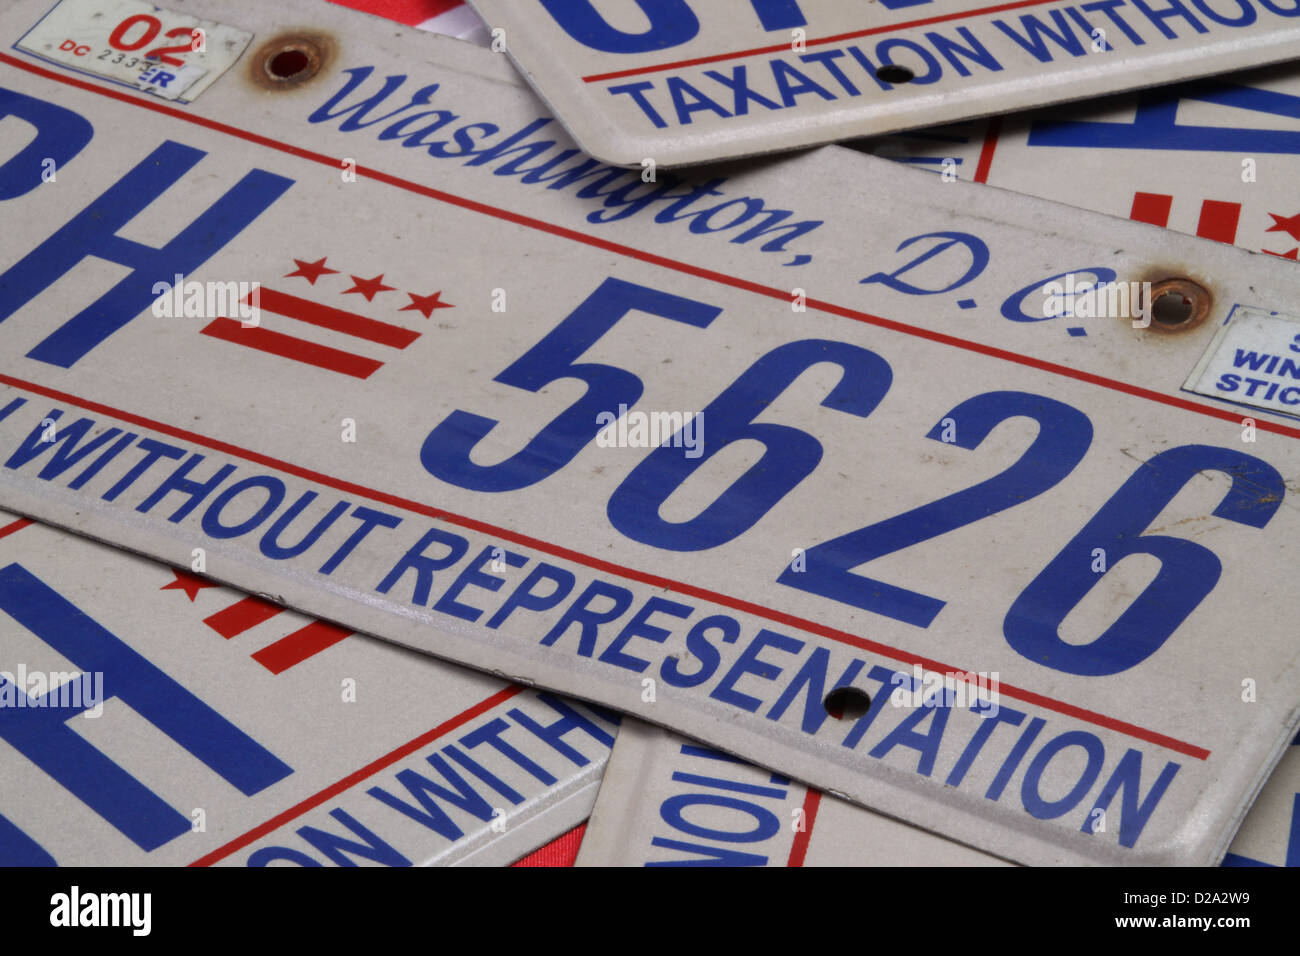 Array of Washington, D.C. license plates displaying 'Taxation Without Representation' Stock Photo